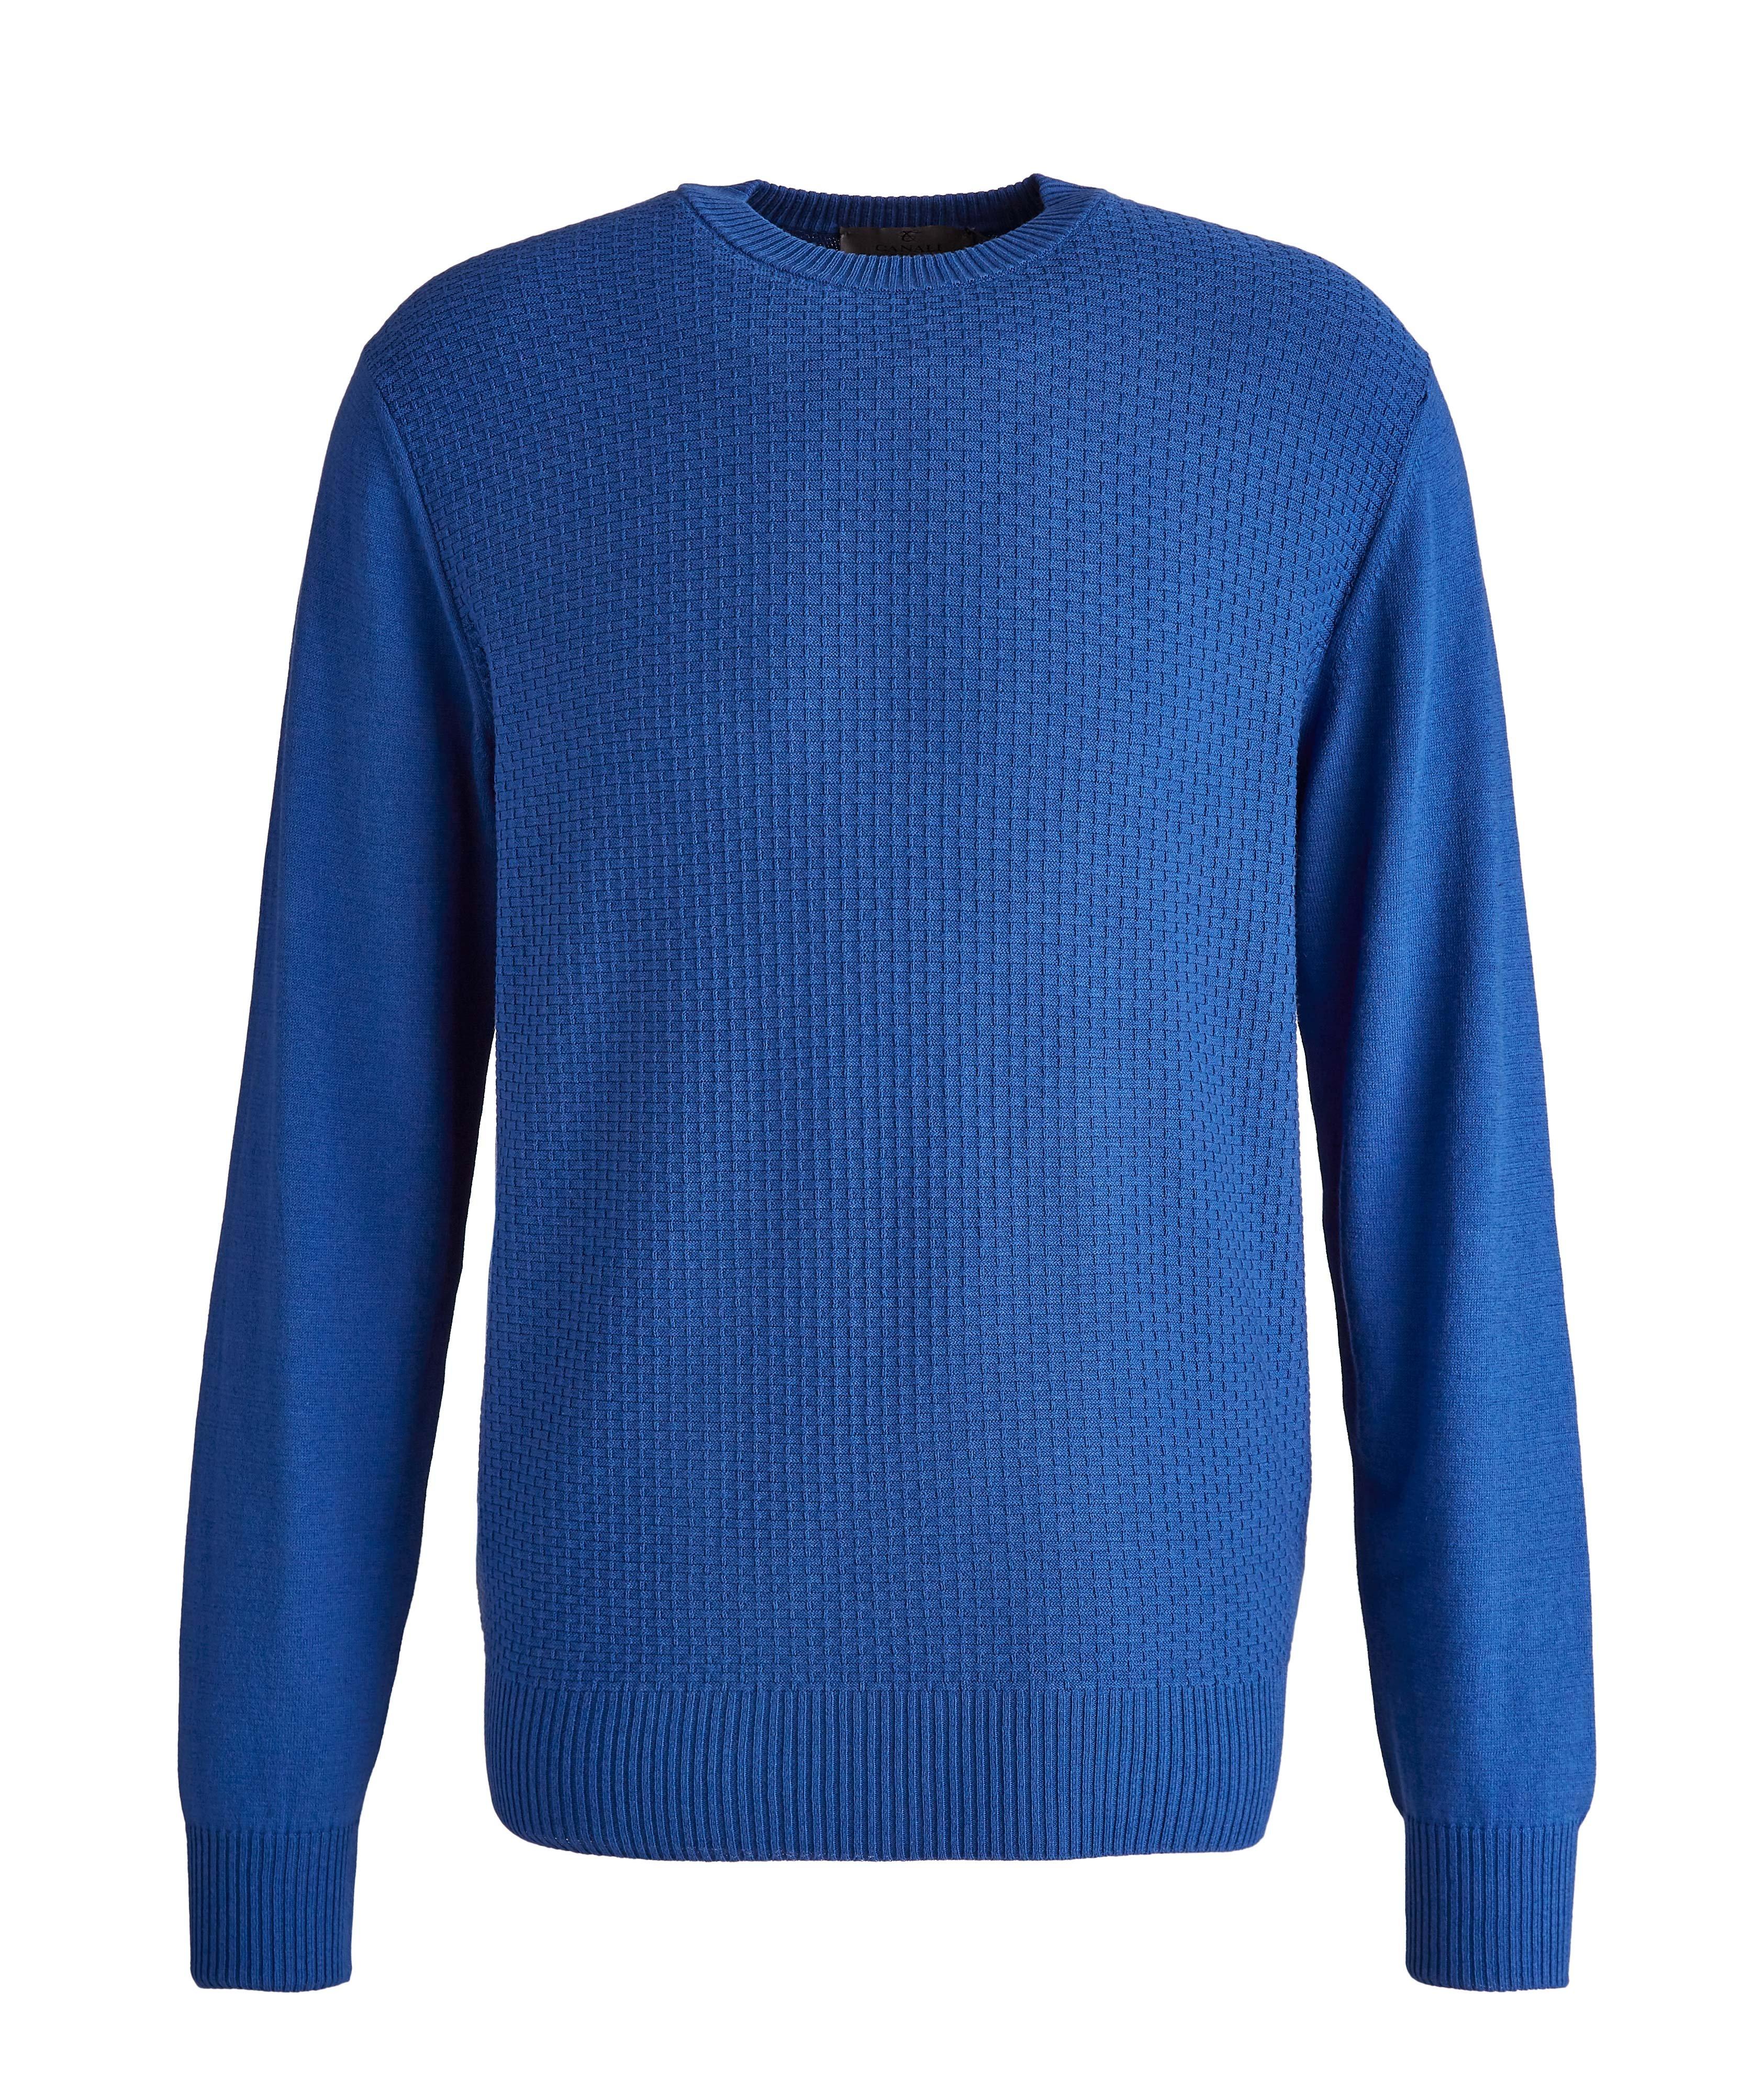 Textured Cotton-Blend Sweater image 0